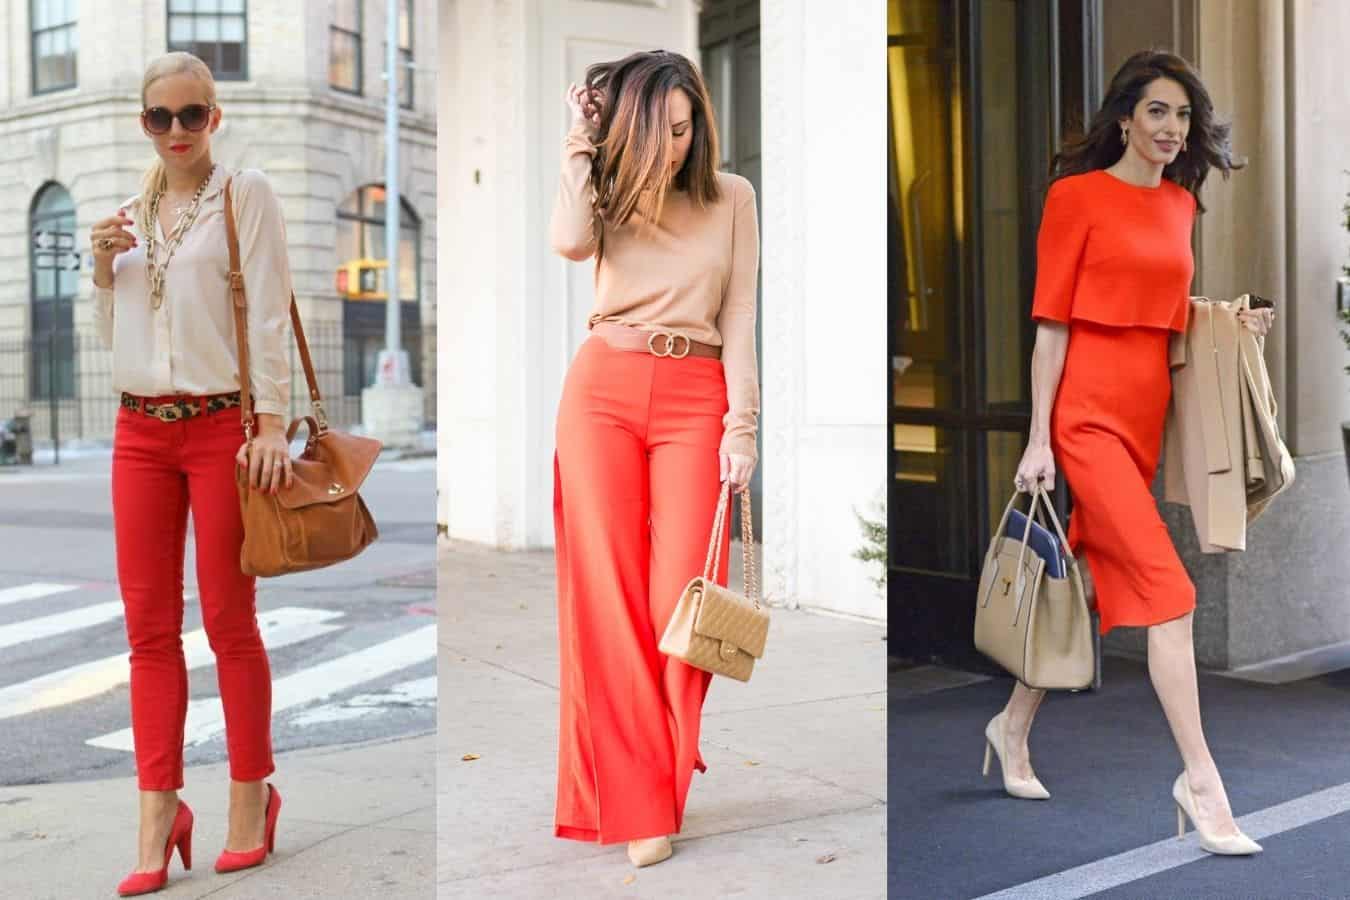 HOW TO STYLE THE PINK AND RED COLOUR COMBO THIS SEASON